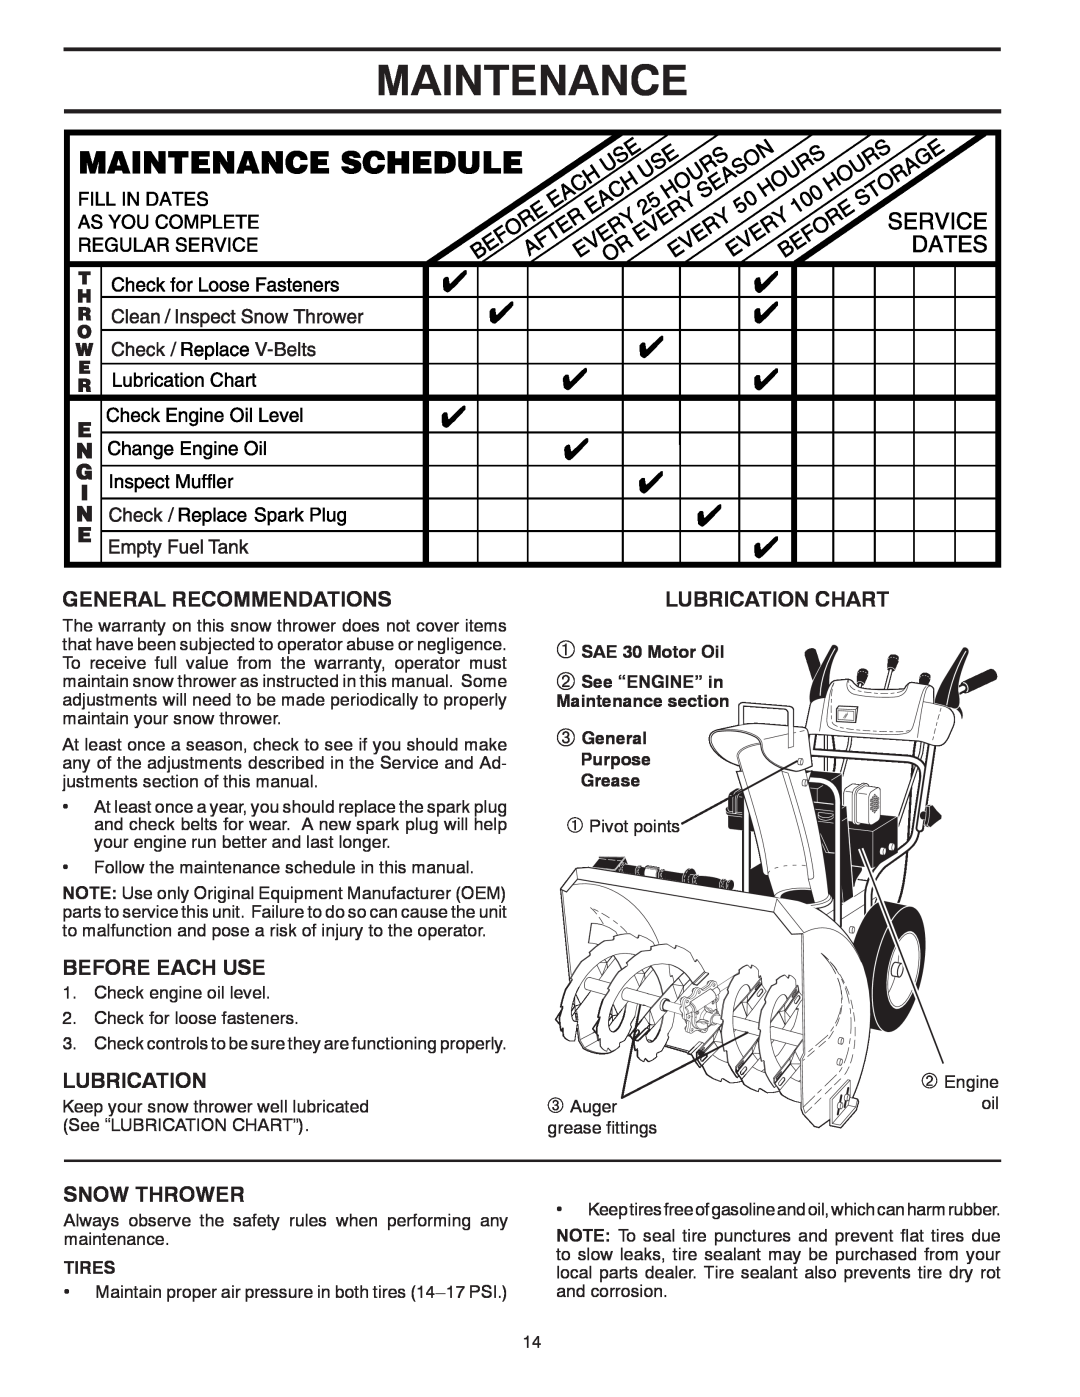 Poulan 435551 owner manual Maintenance, General Recommendations, Before Each Use, Snow Thrower, Lubrication Chart 